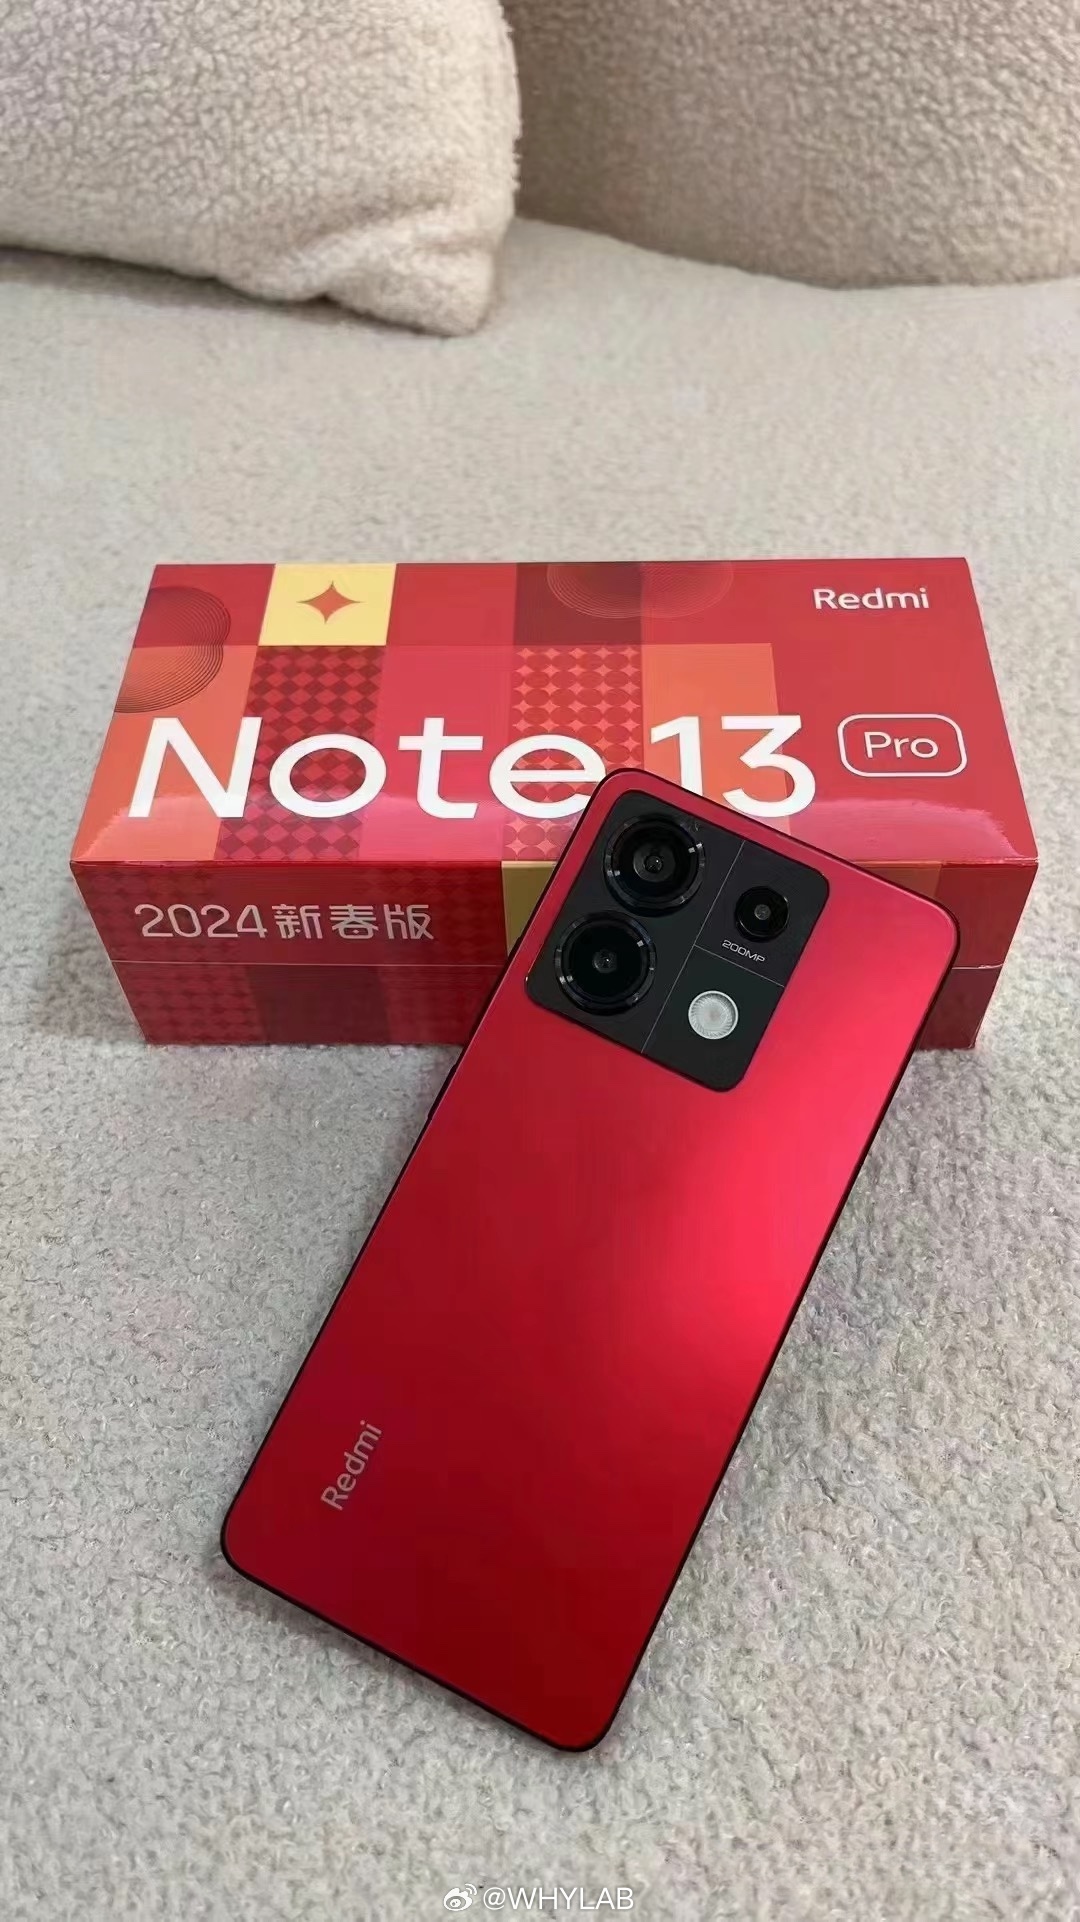 redmi-note-13-pro-unboxing-first-look-120w-200mp-ip68-youtube